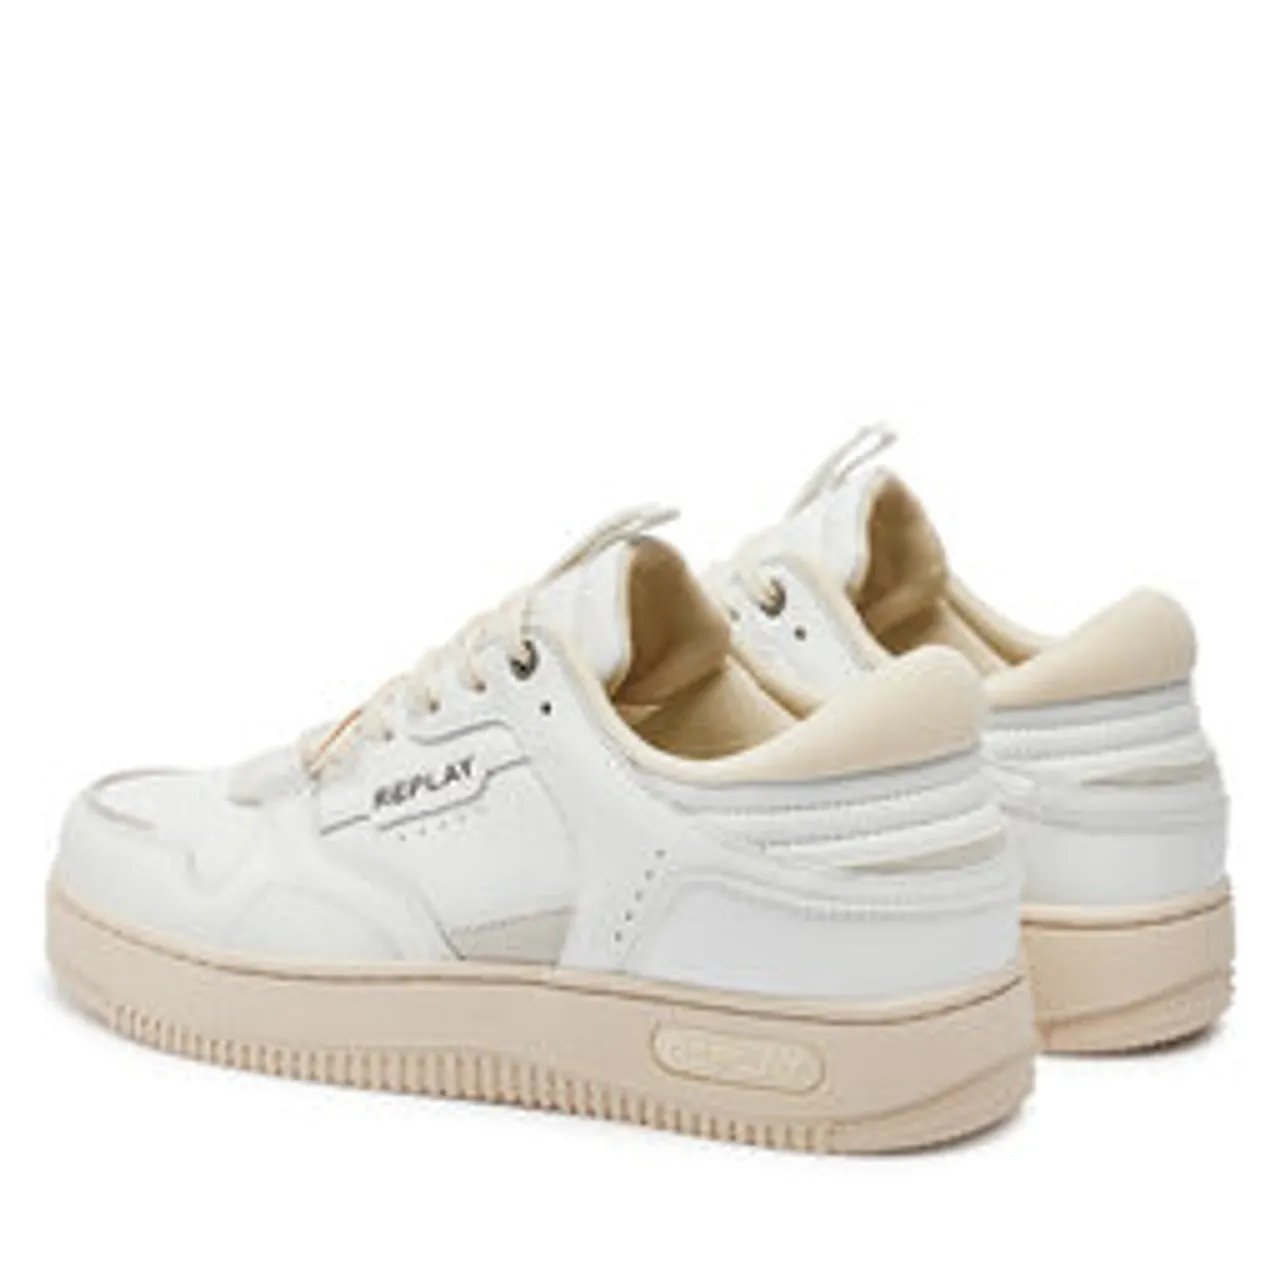 Sneakers Replay GMZ3G.000.C0036L White/Off Wht 123